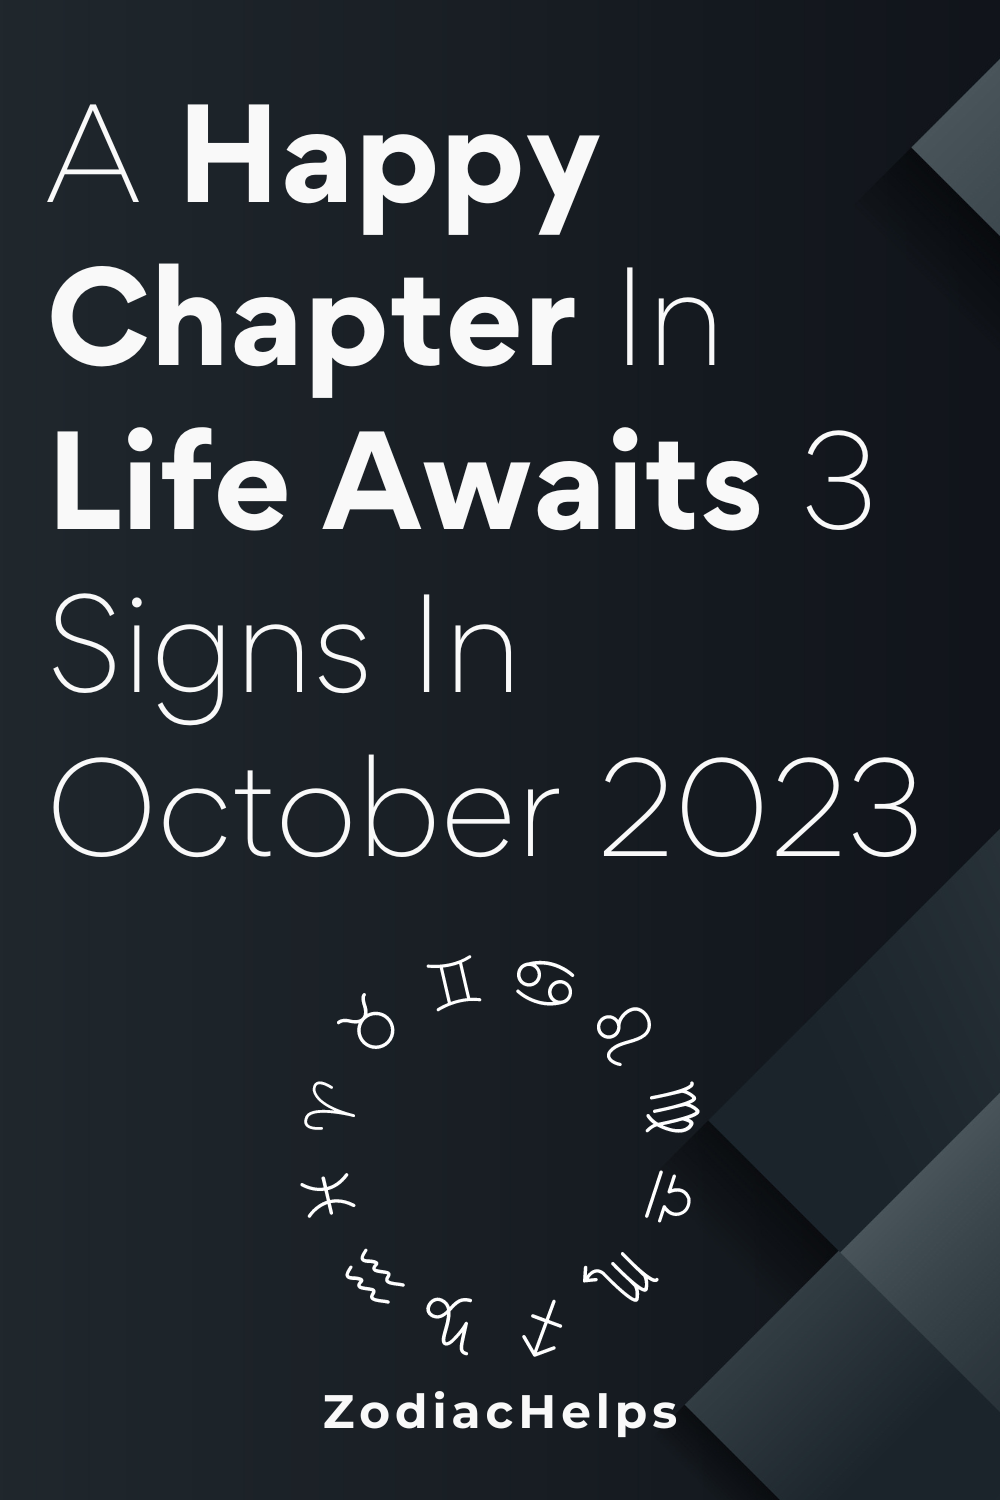 A Happy Chapter In Life Awaits 3 Signs In October 2023